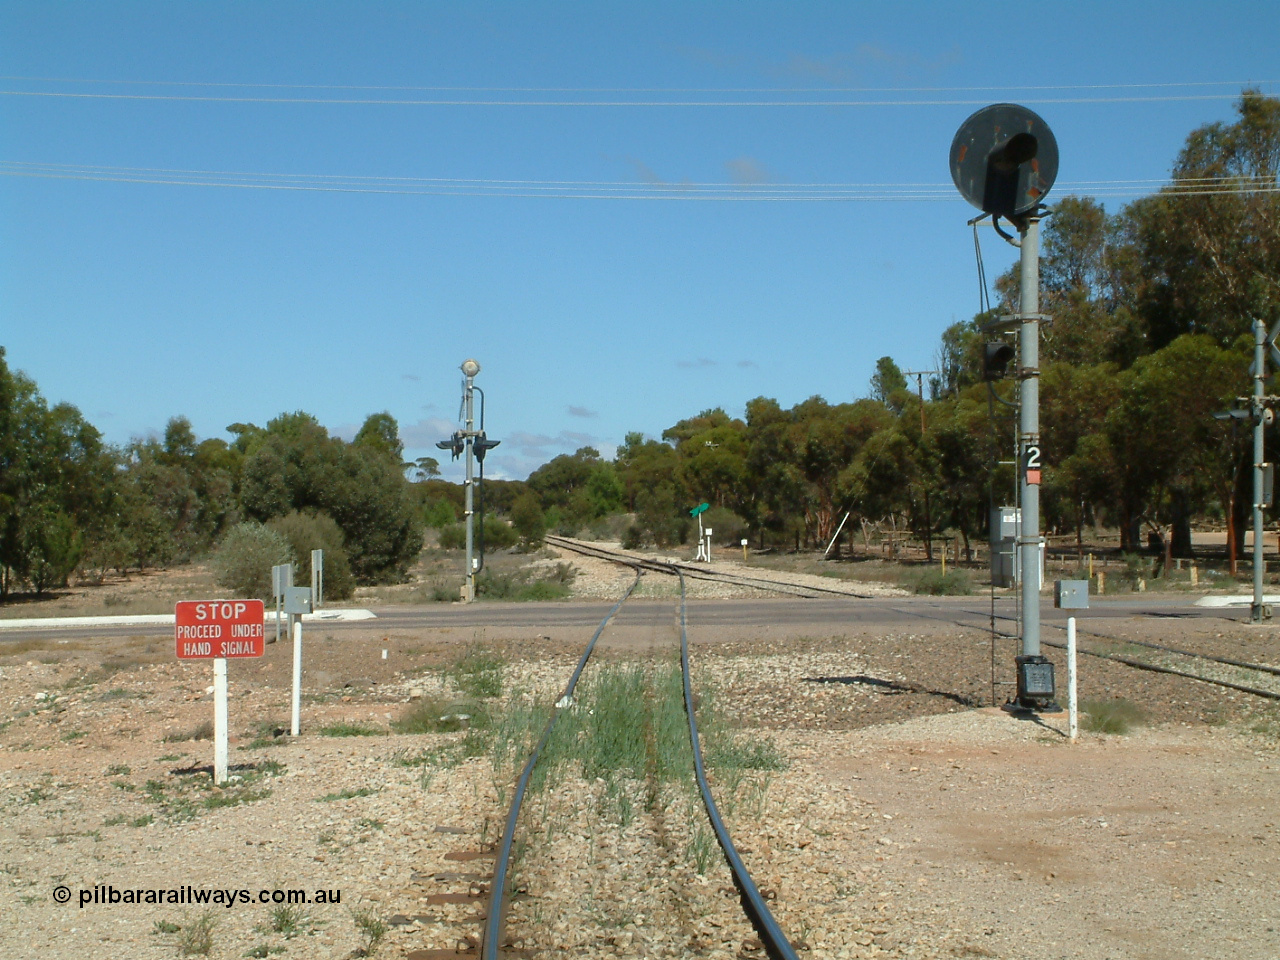 030411 110811
Kimba, looking south across the Eyre Highway grade crossing, the grain road has to use hand signals, the mainline has a coloured light, one of only three such signals on the Eyre Peninsula system, the others being at Kyancutta and Port Lincoln.
